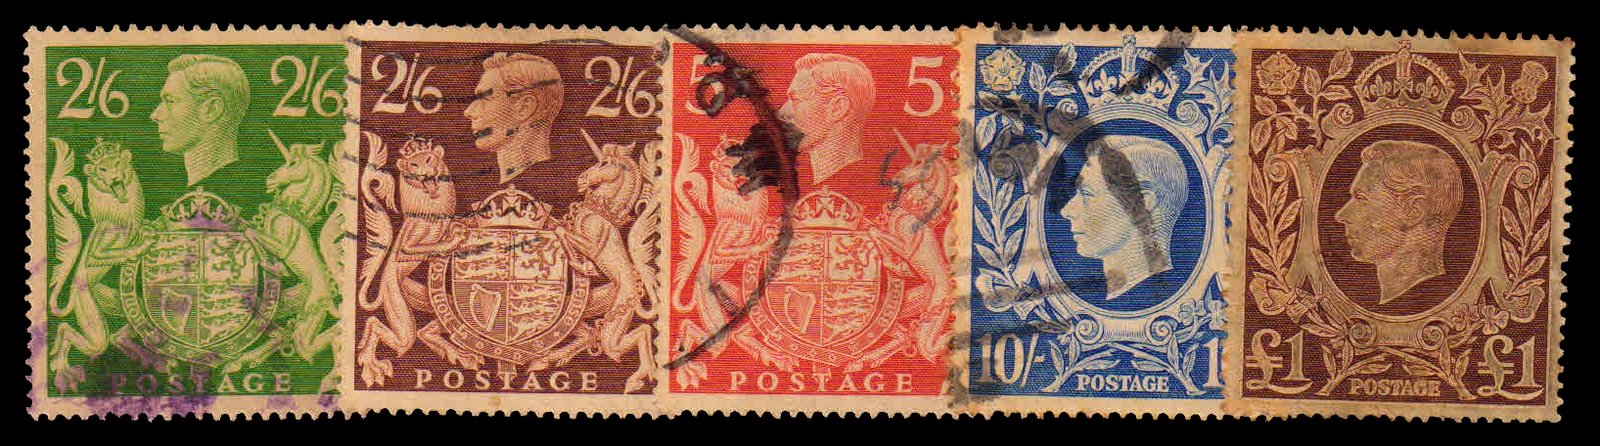 GREAT BRITAIN (England) 1939 - King George VI. High Value Used Stamps. Set of 4. S.G. 476-478c. Cat £ 42.00